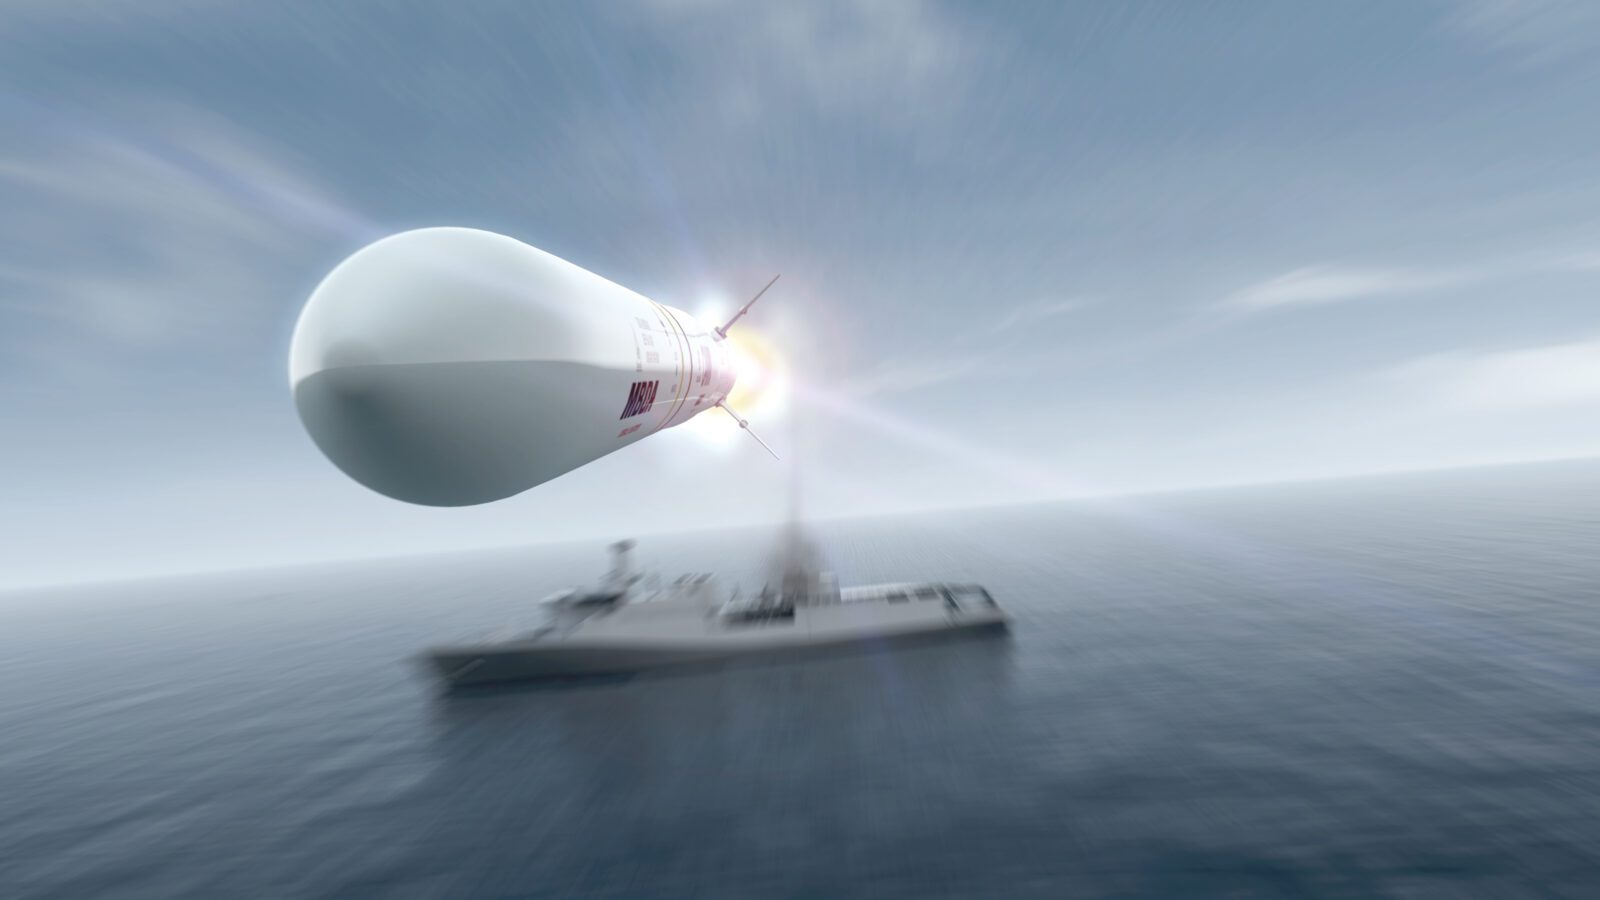 MBDA presents the latest missile technologies at LAAD 2023